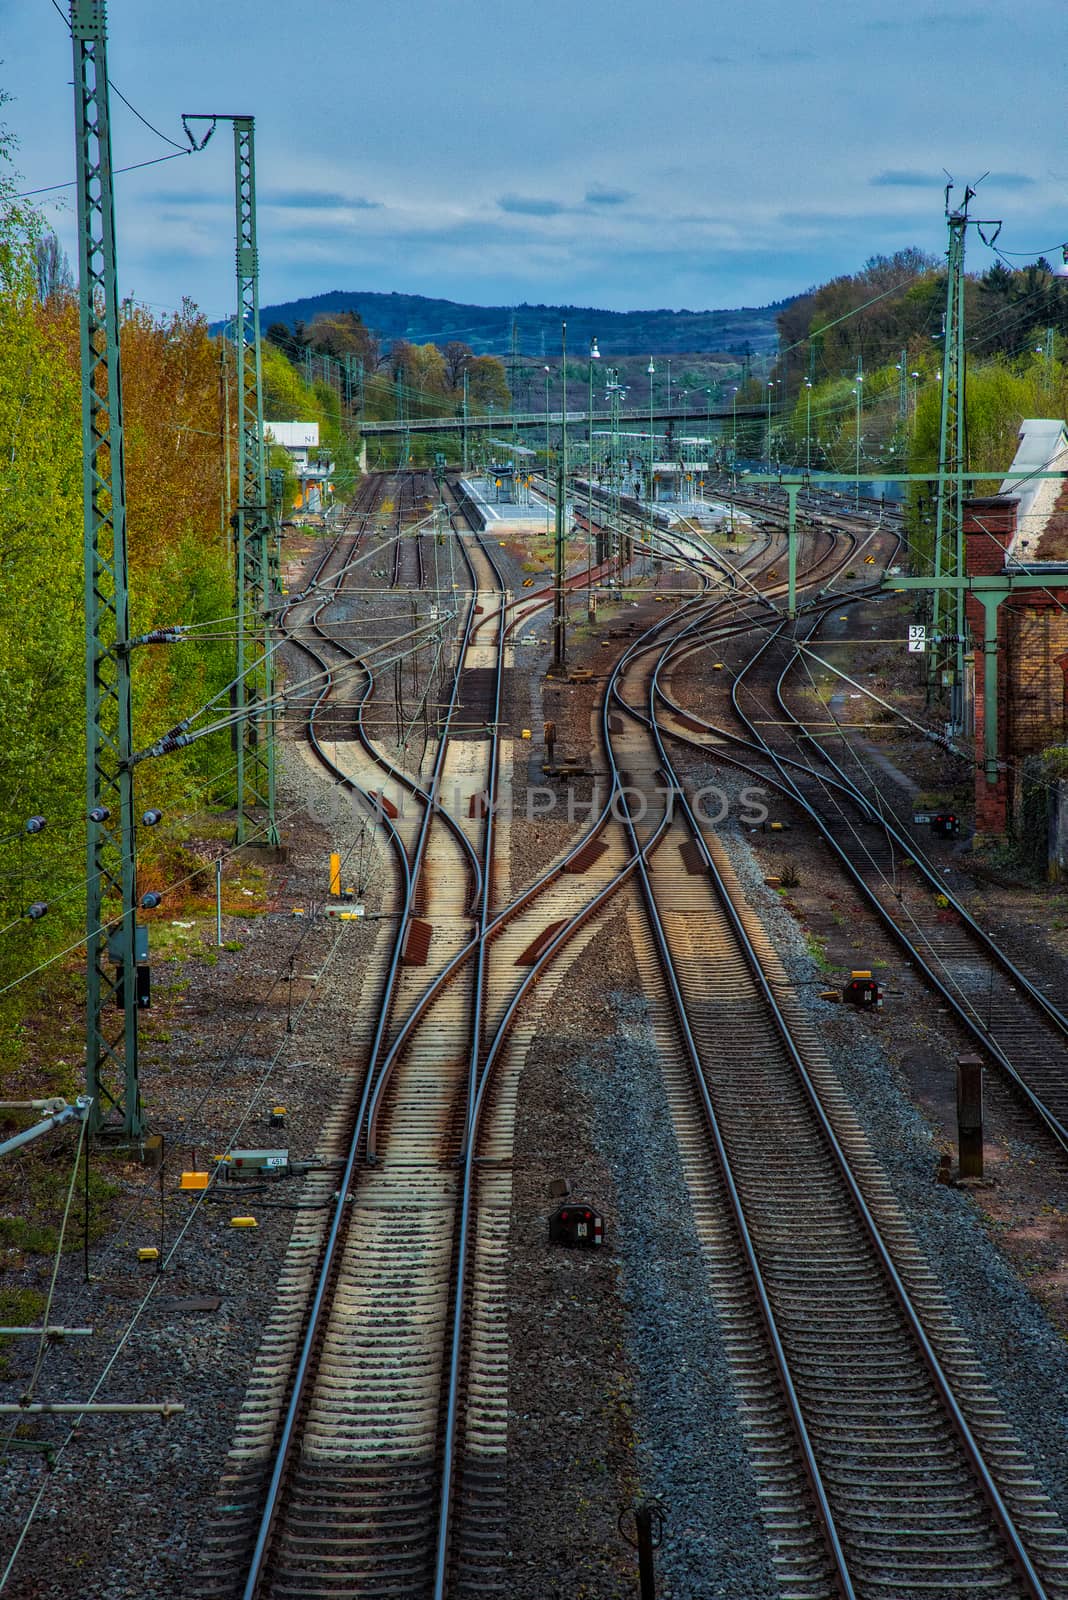 Perspective from obove onto railway tracks and switches